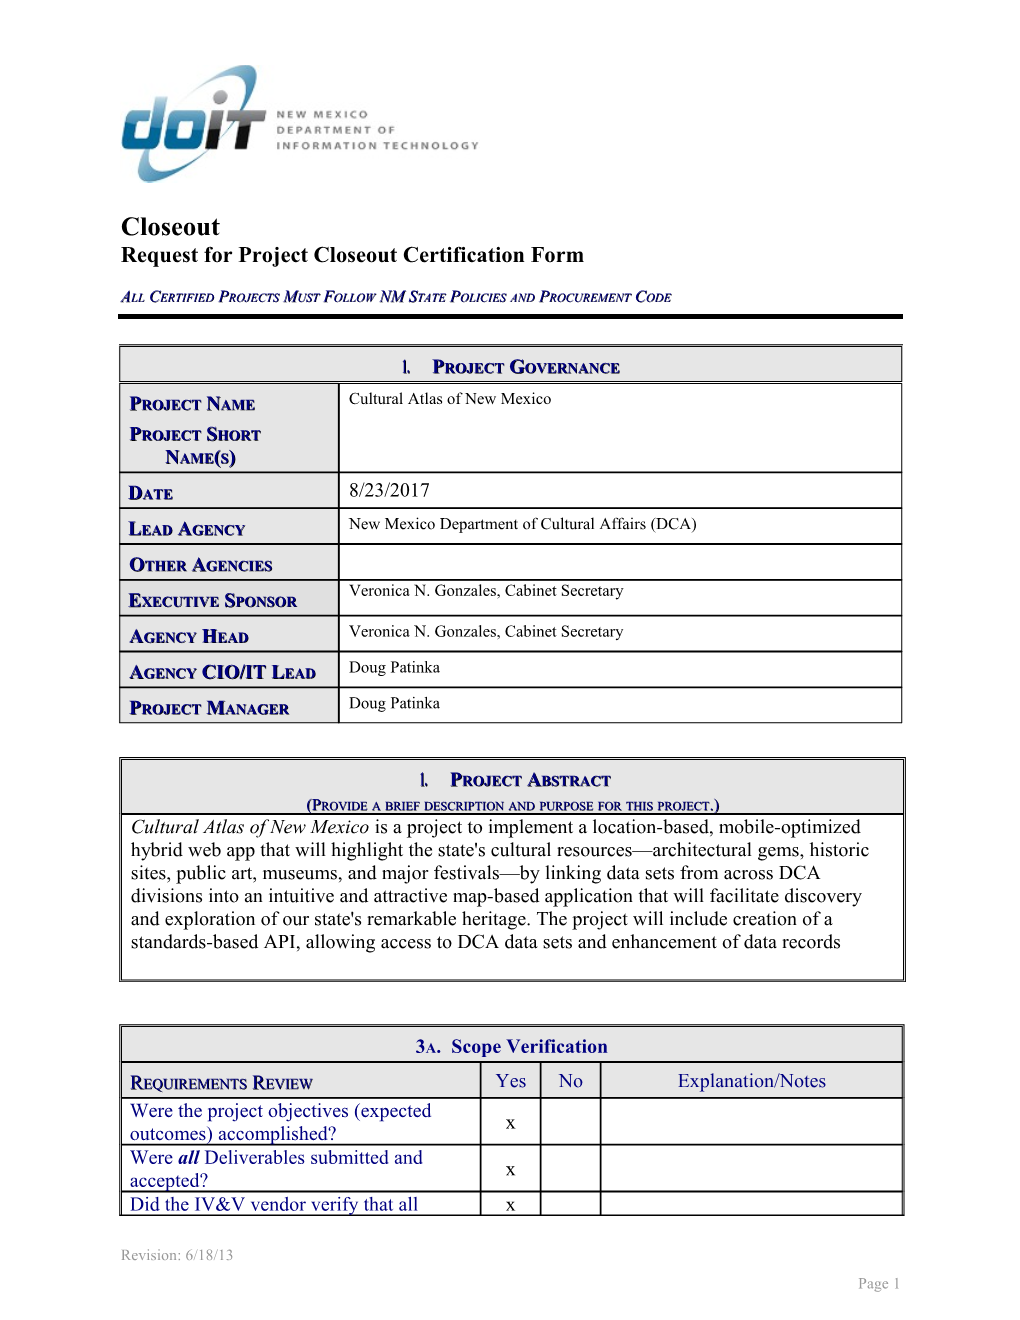 Request for Project Closeout Certification Form s1